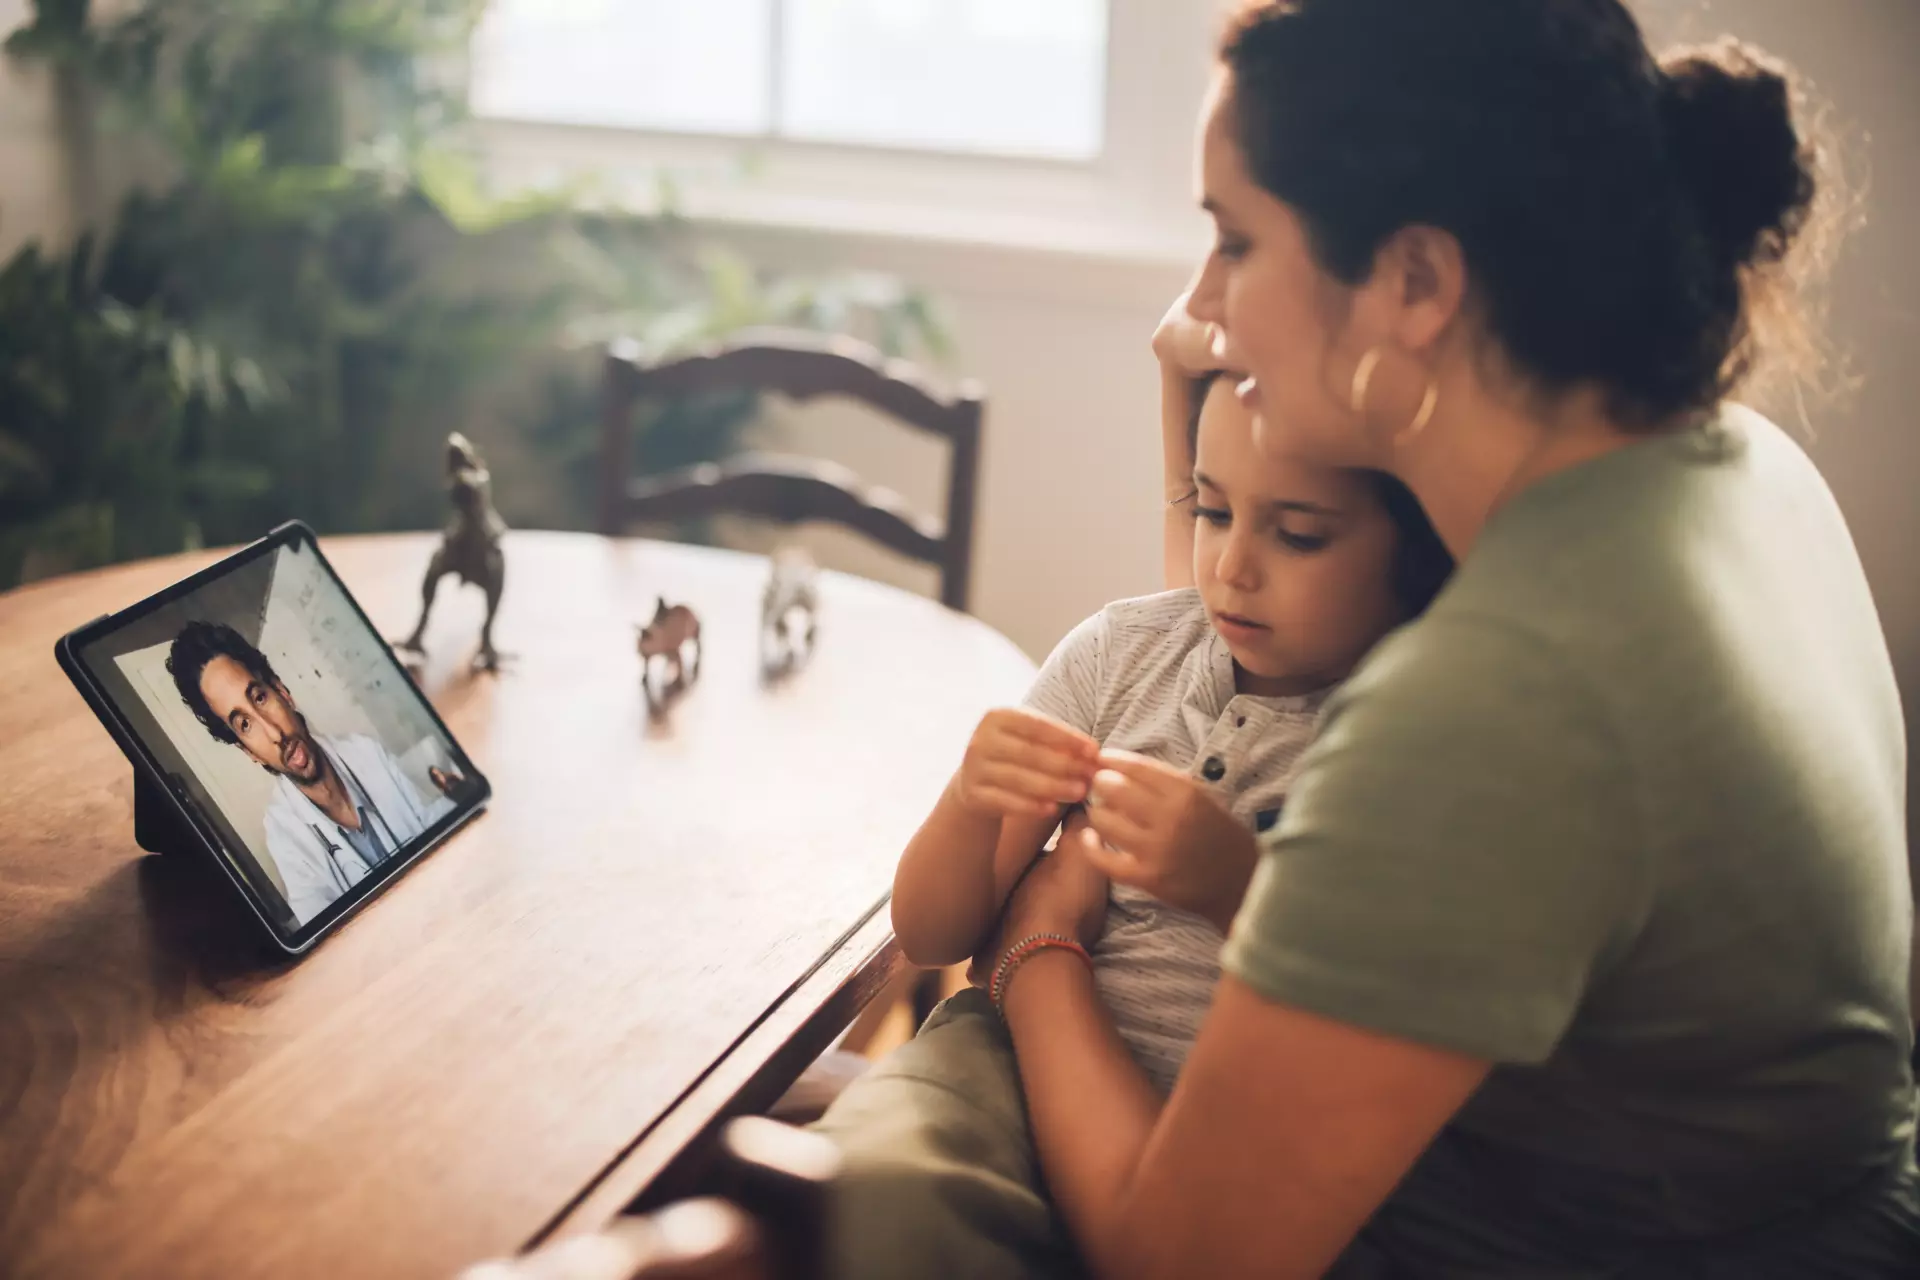 A woman holds a small child in her lap while she uses Telemedicine to communicate with a doctor on a tablet set on a dining room table, next to some toy dinosaurs.